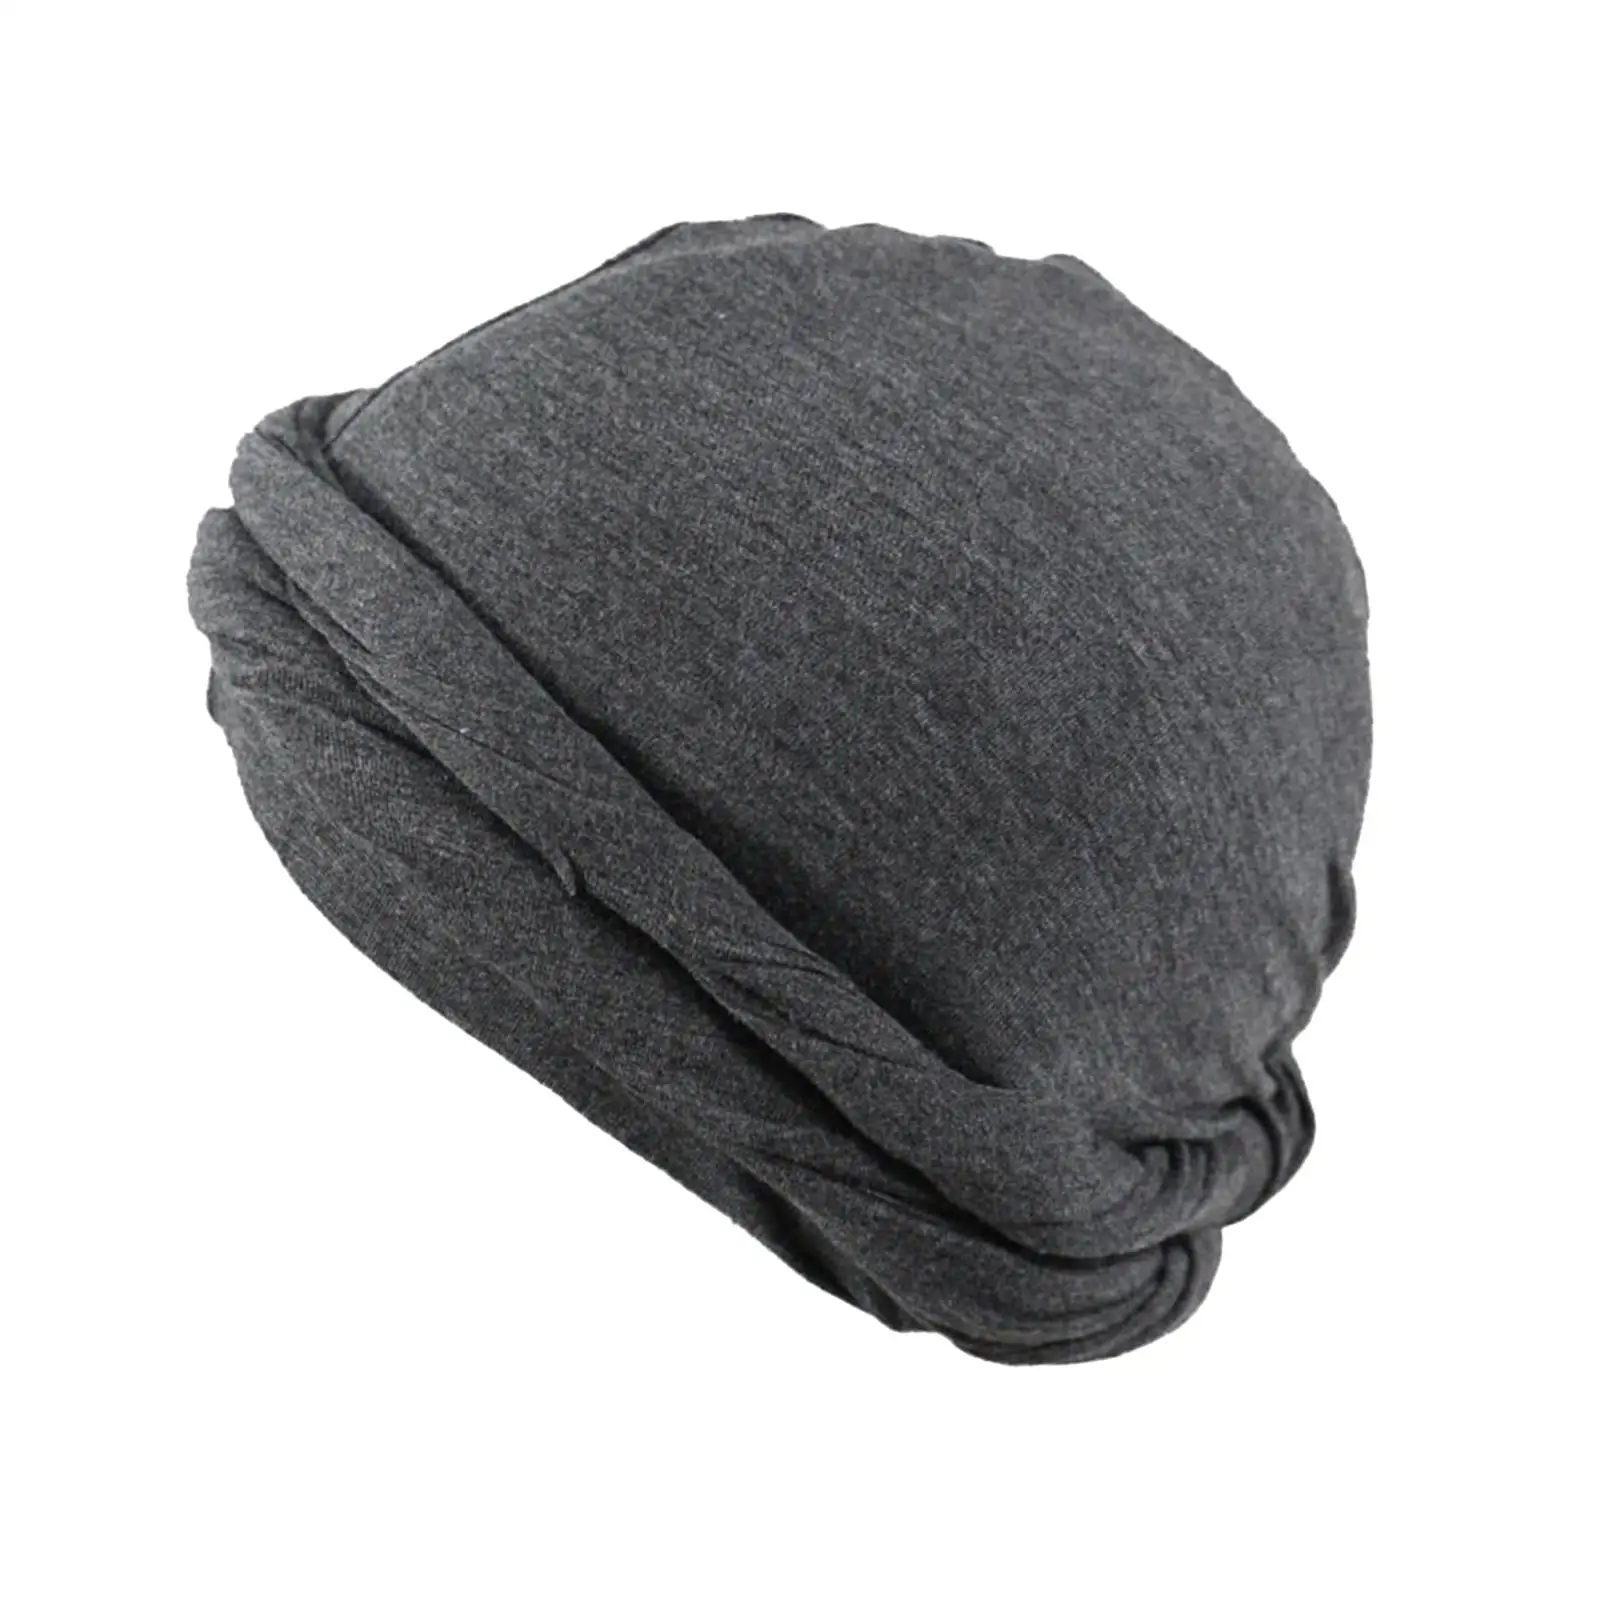 Cycling Hat Headband Hat Headscarf Baggy Skull Hat Warm Pullover Hat Head Cover Lightweight Beanie for Climbing Daily